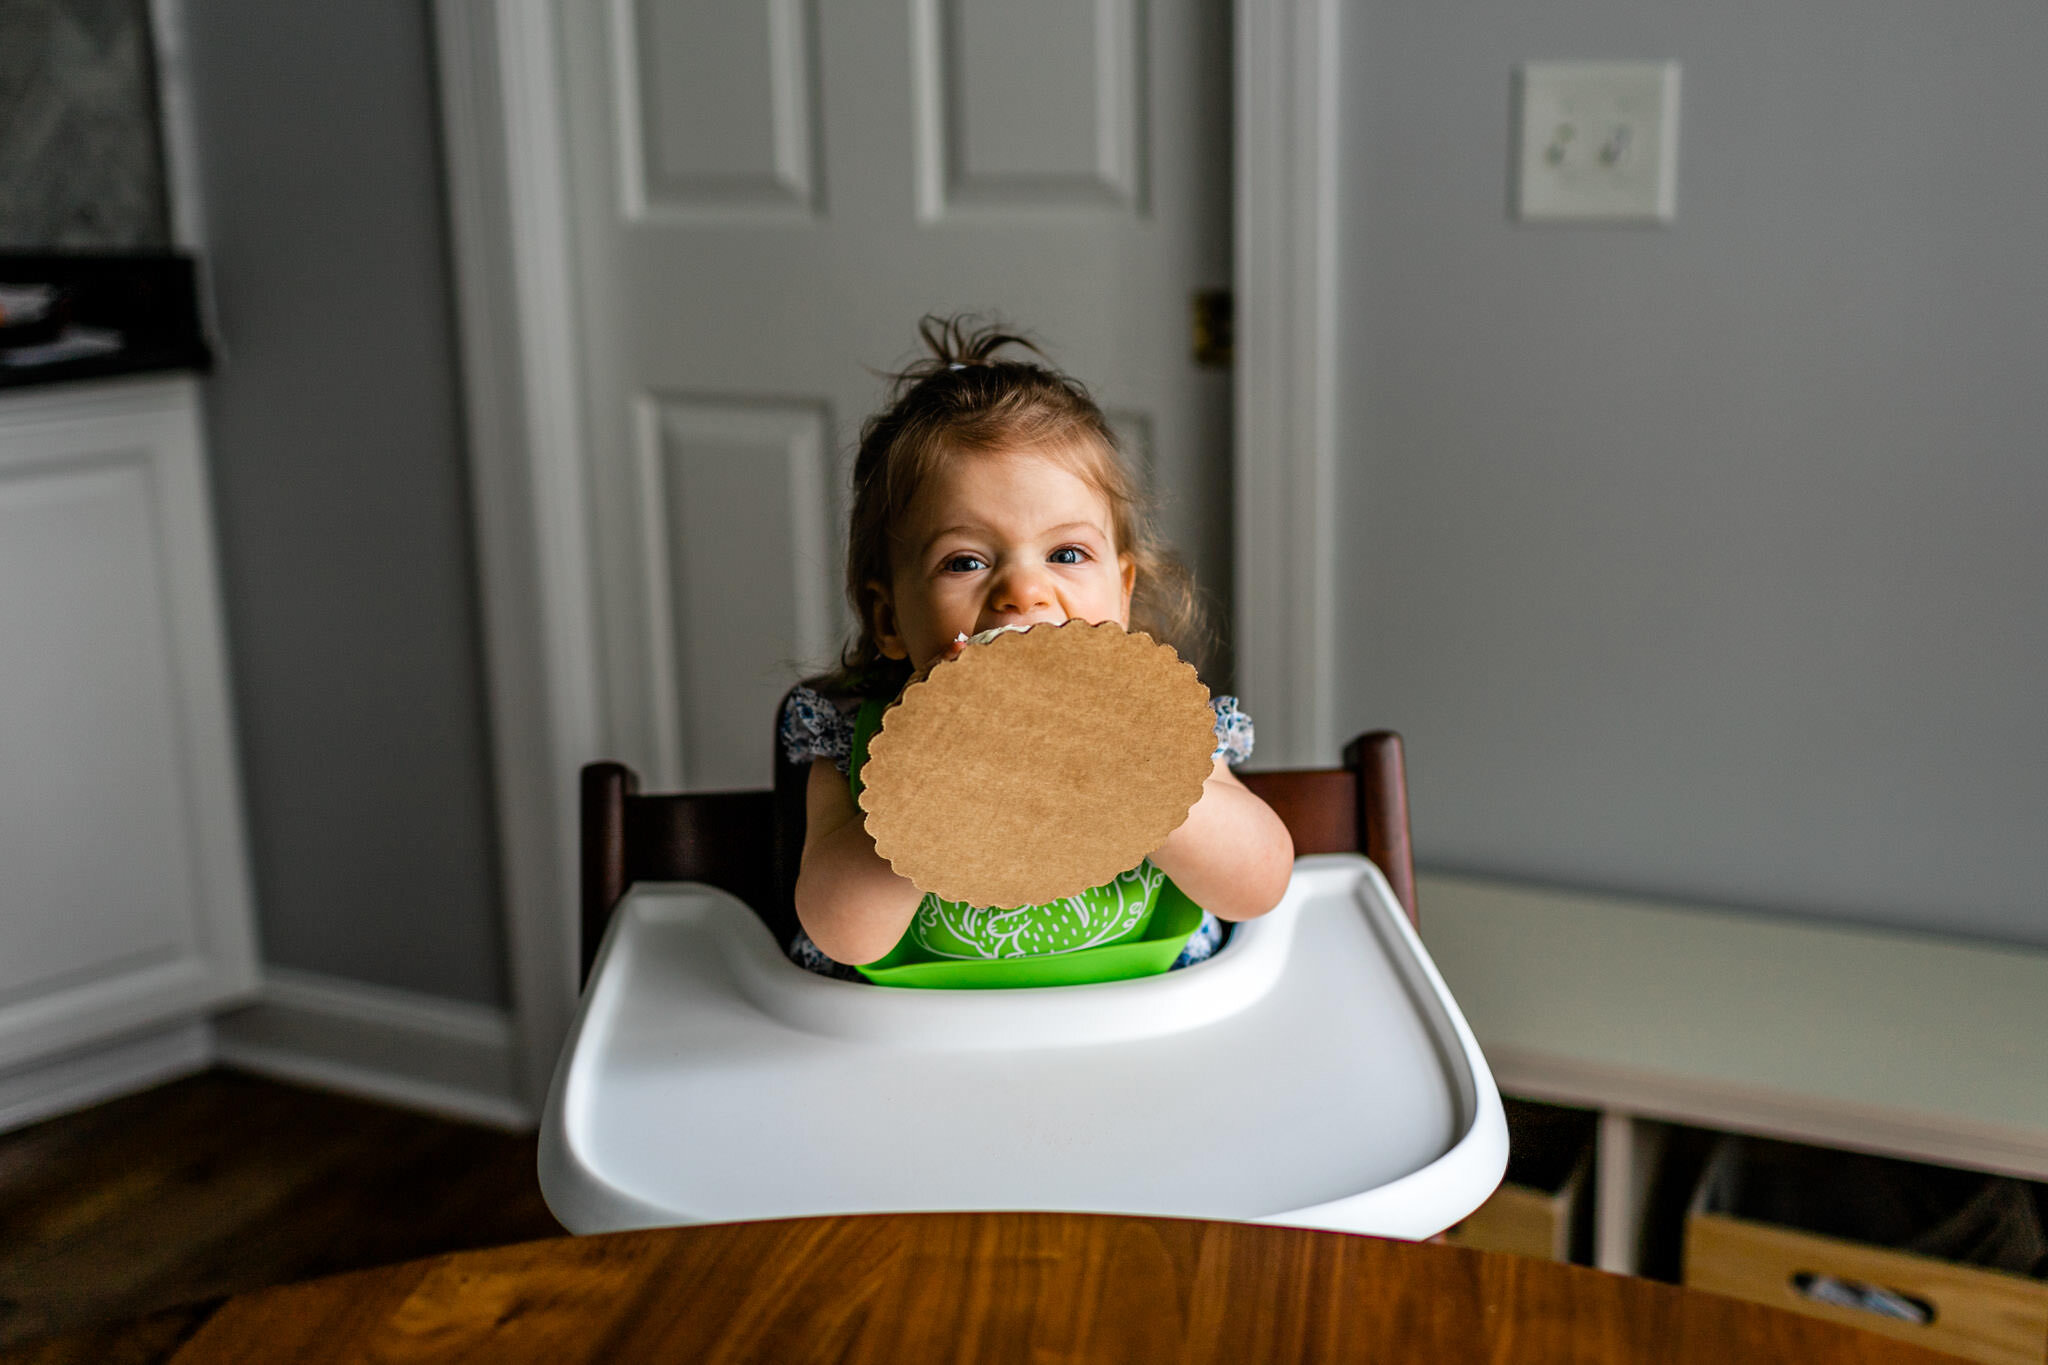 Durham Family Photographer | By G. Lin Photography | Baby girl putting cake in her mouth